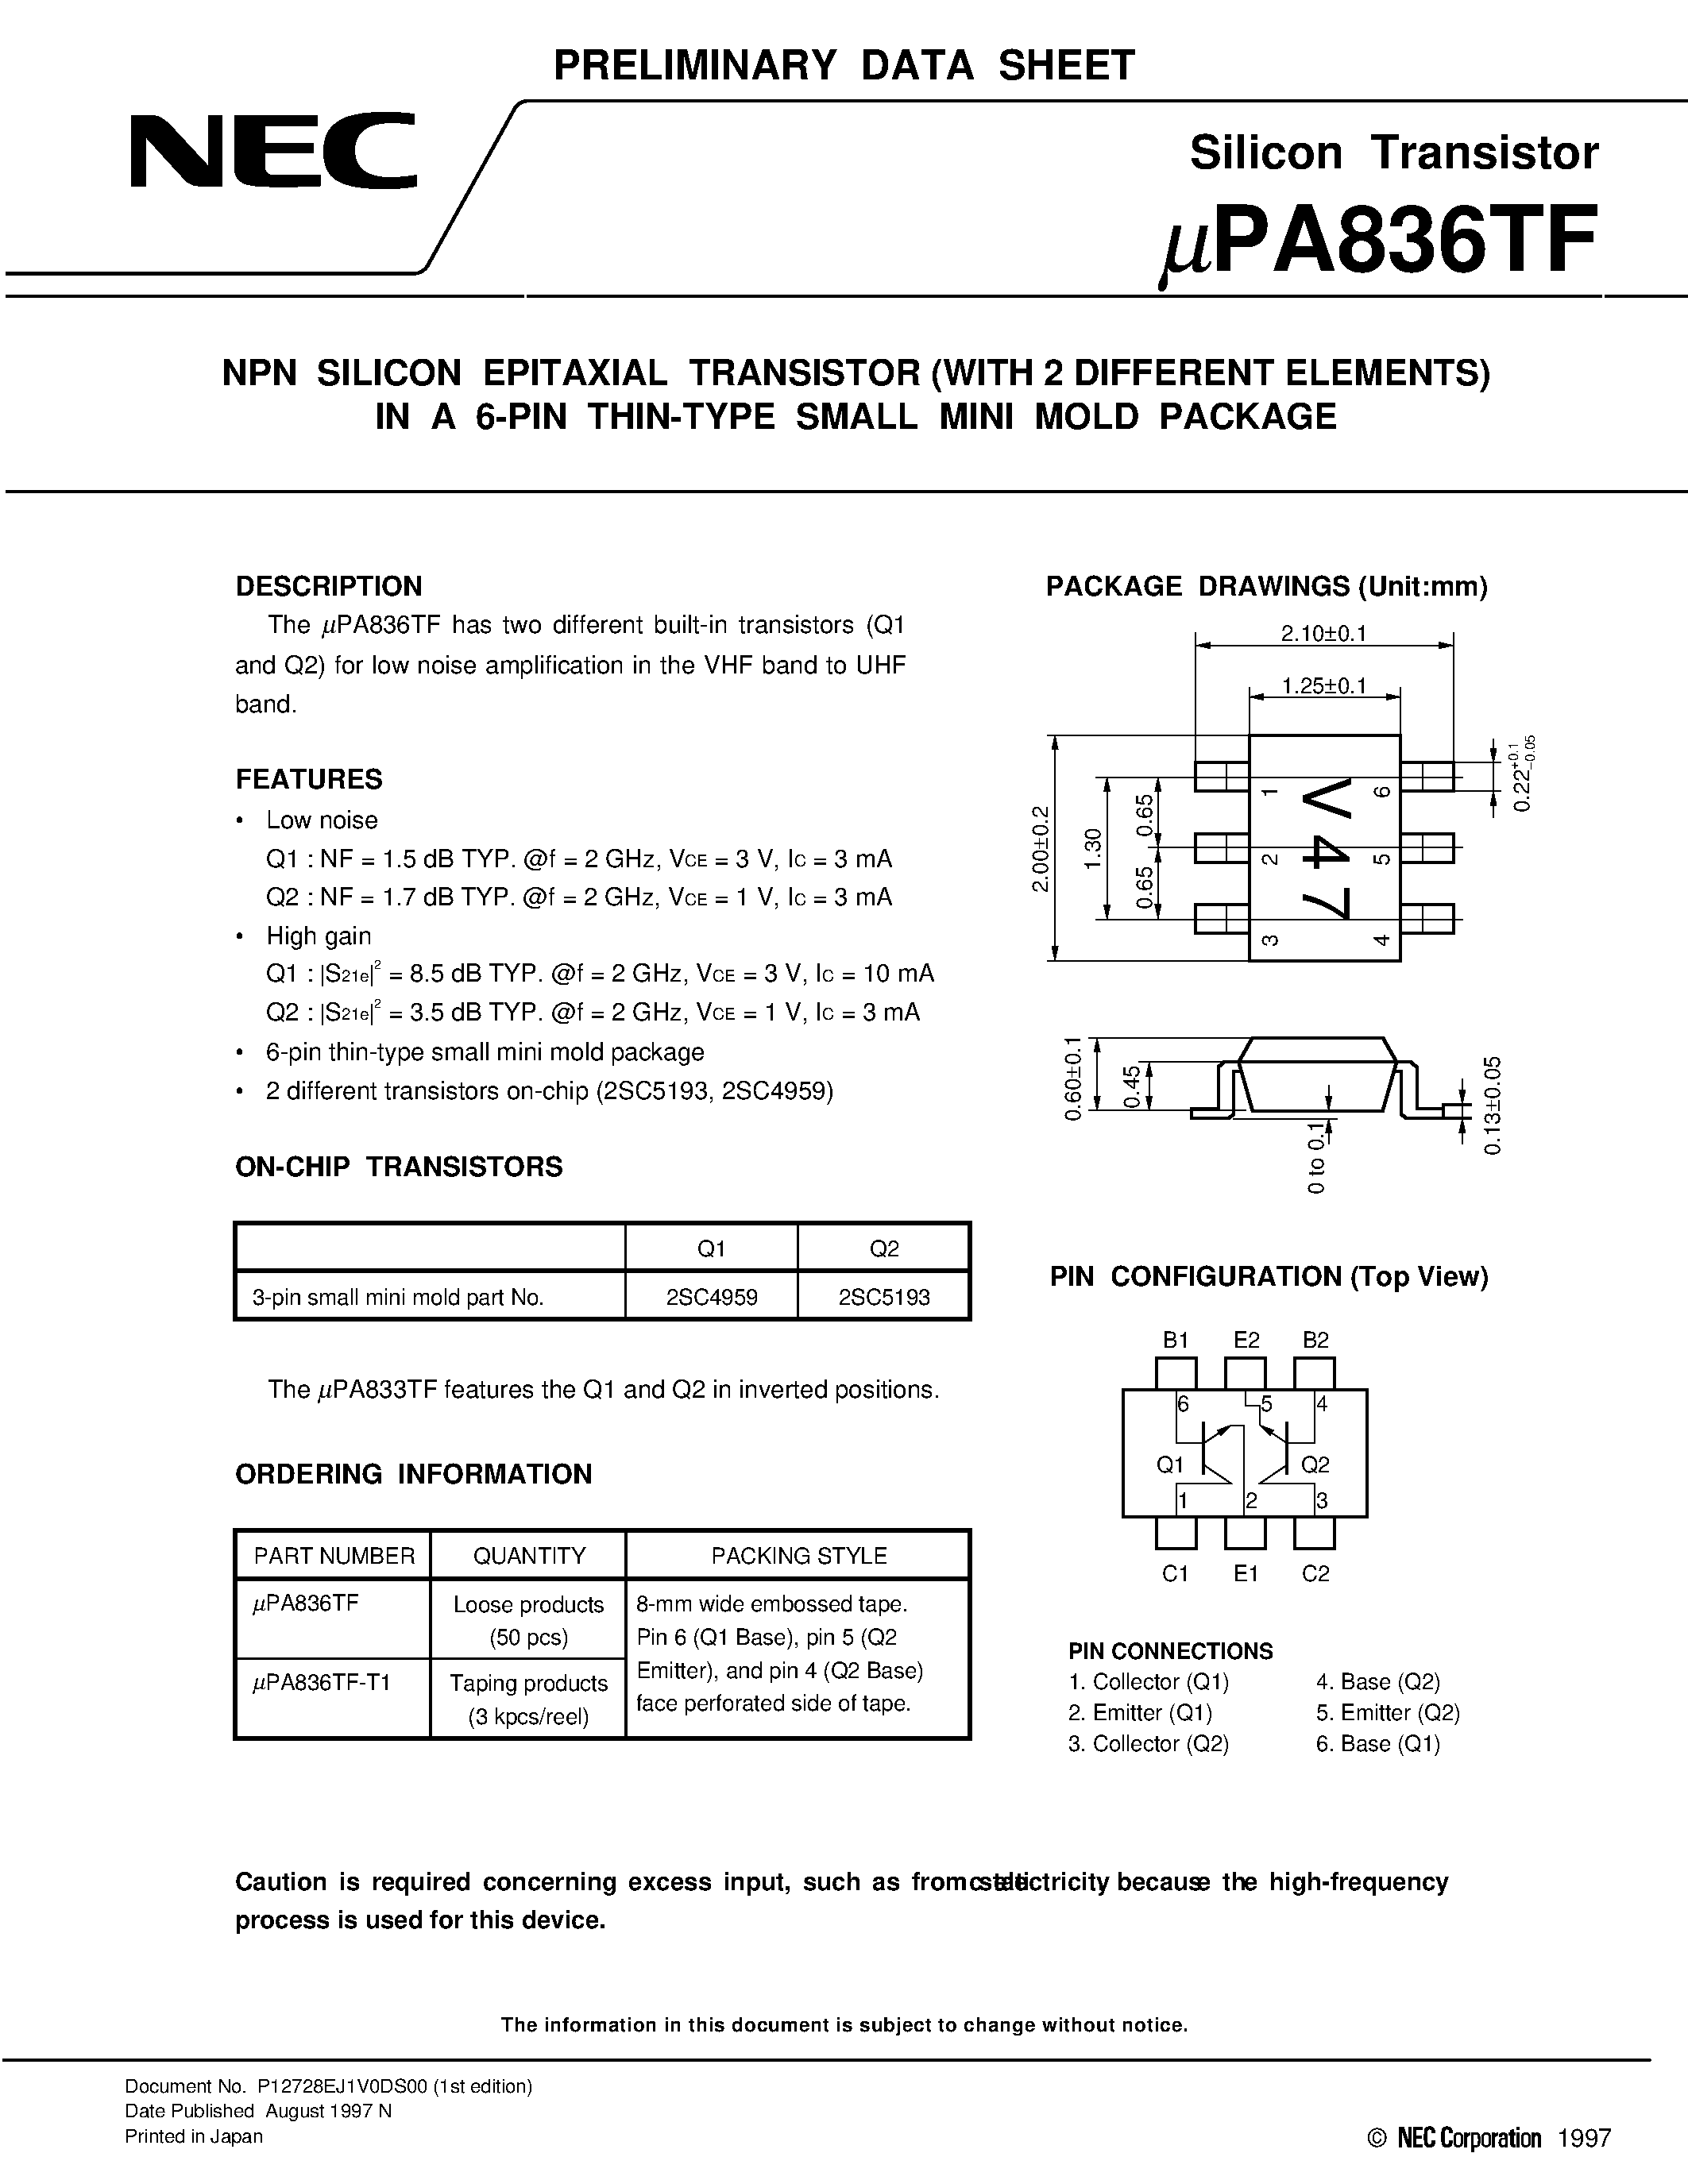 Datasheet UPA836 - NPN SILICON EPITAXIAL TRANSISTOR WITH 2 DIFFERENT ELEMENTS IN A 6-PIN THIN-TYPE SMALL MINI MOLD PACKAGE page 1